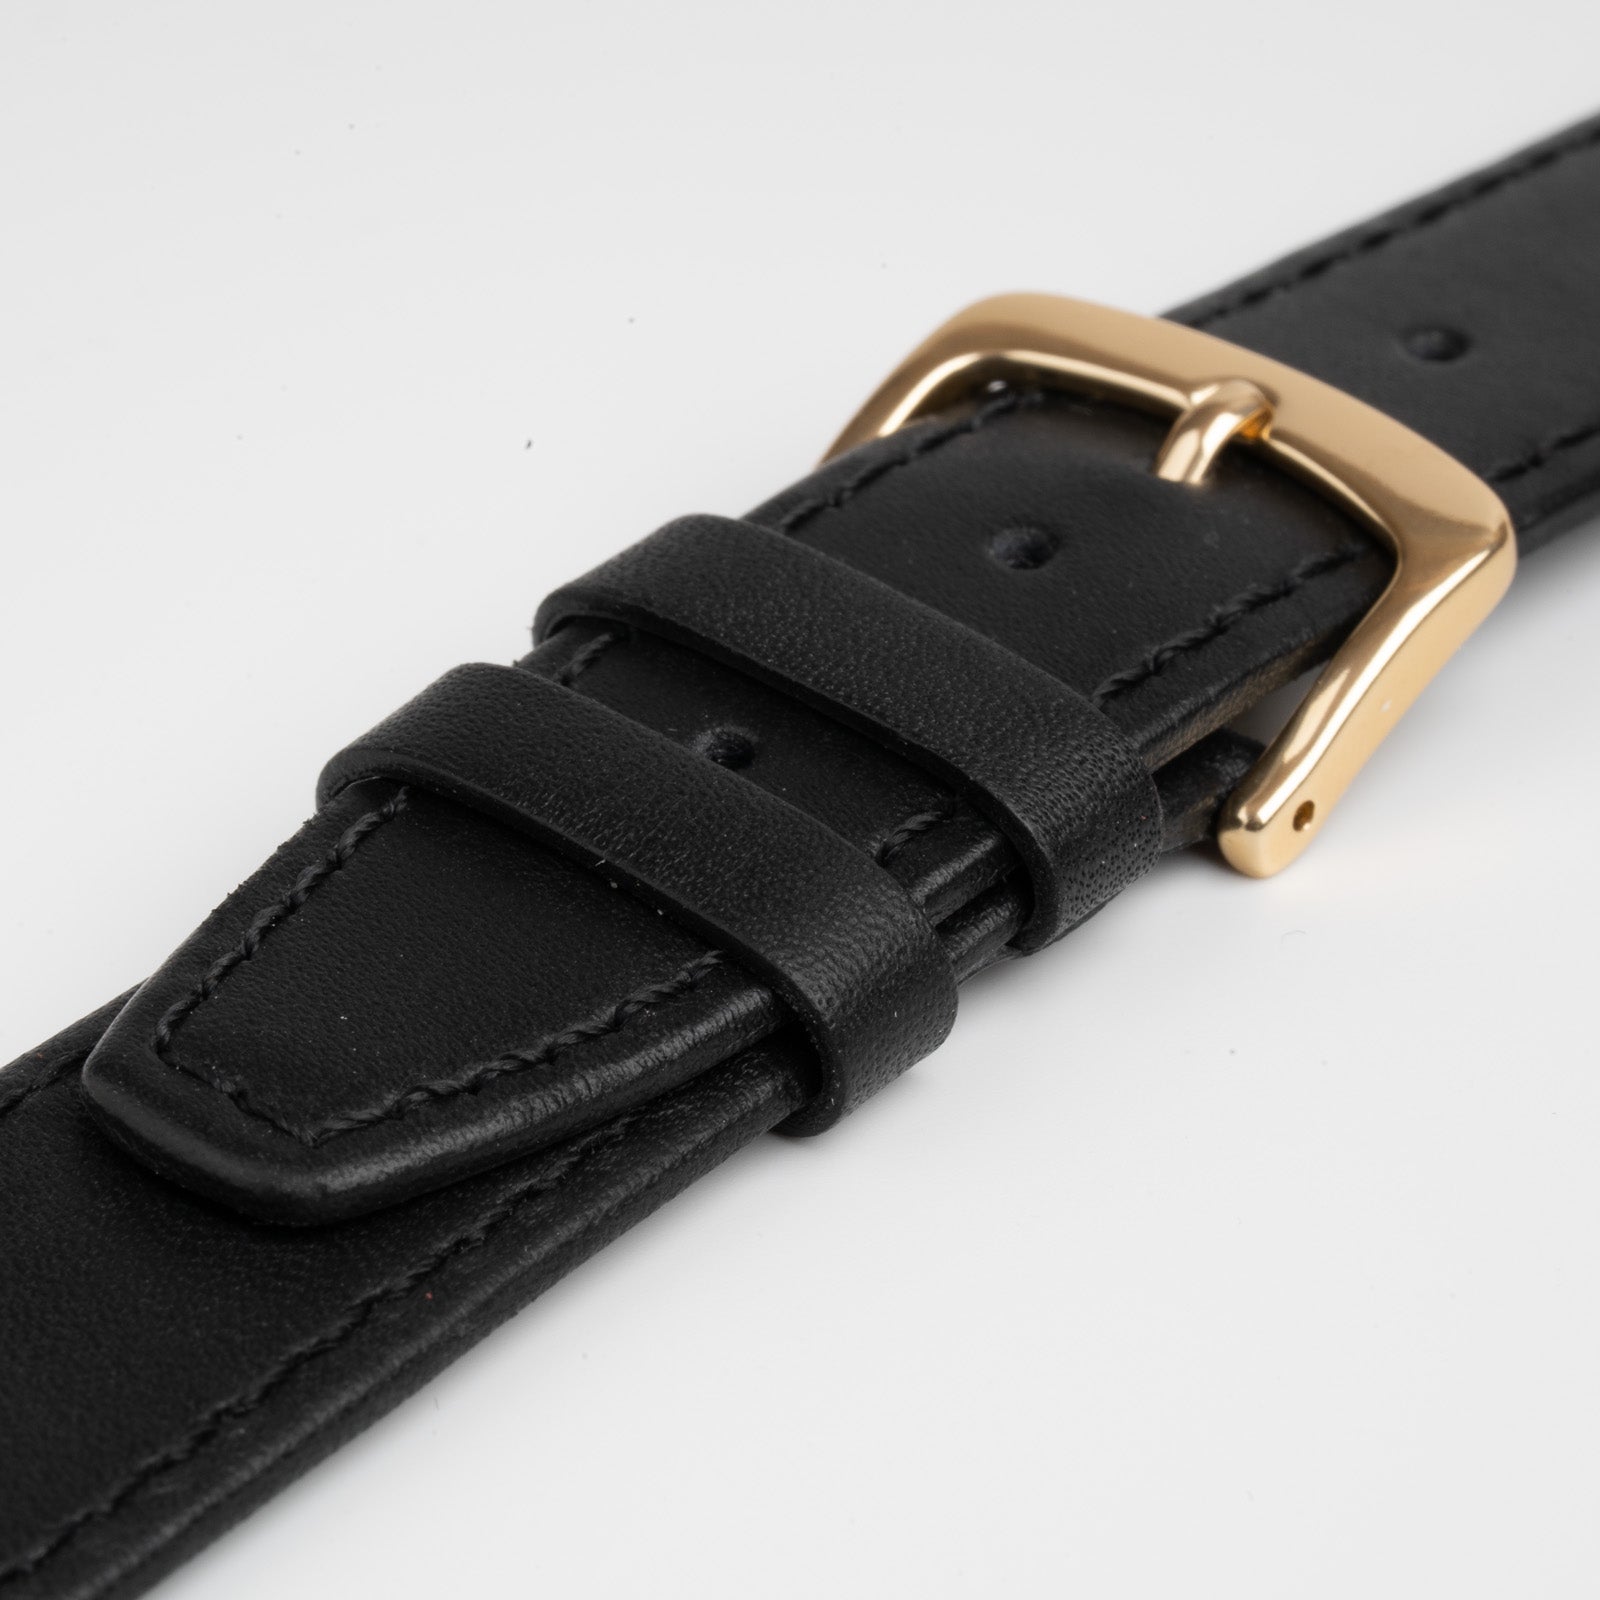 Water Resistant Stitched Black Watch Strap